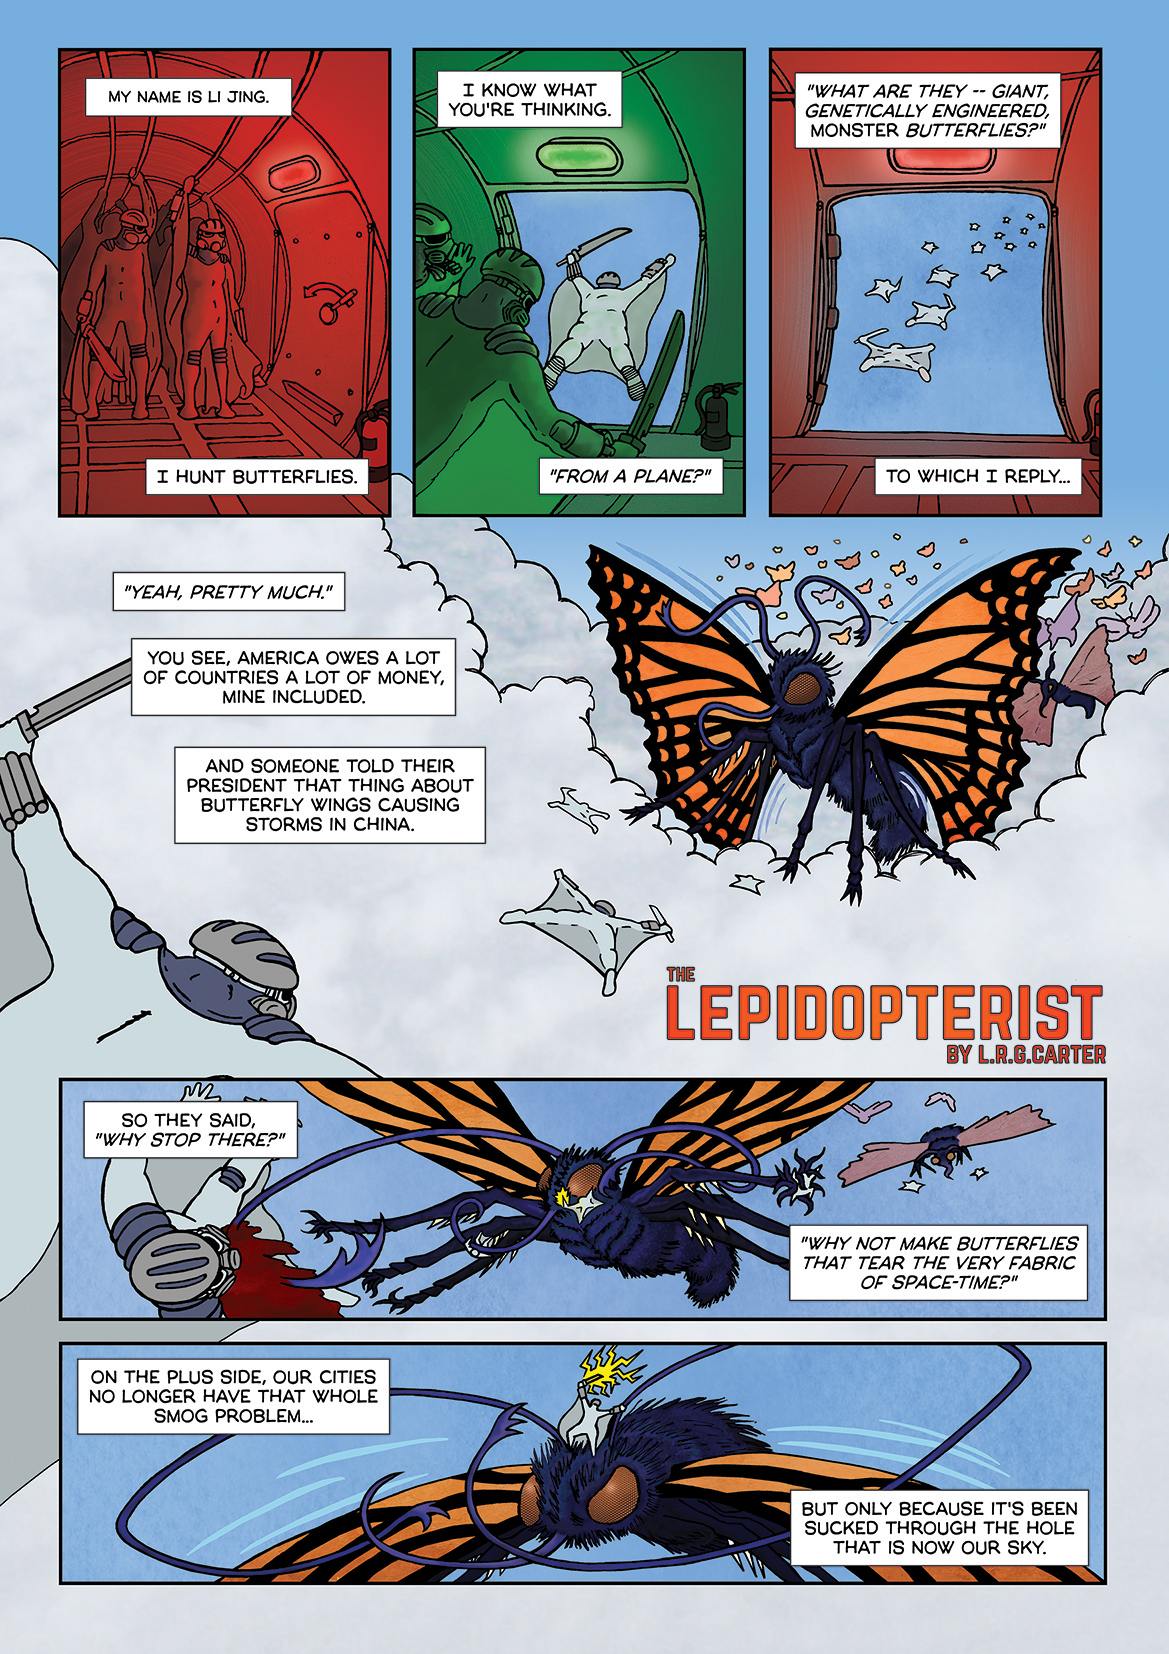 The Lepidopterist, page one.